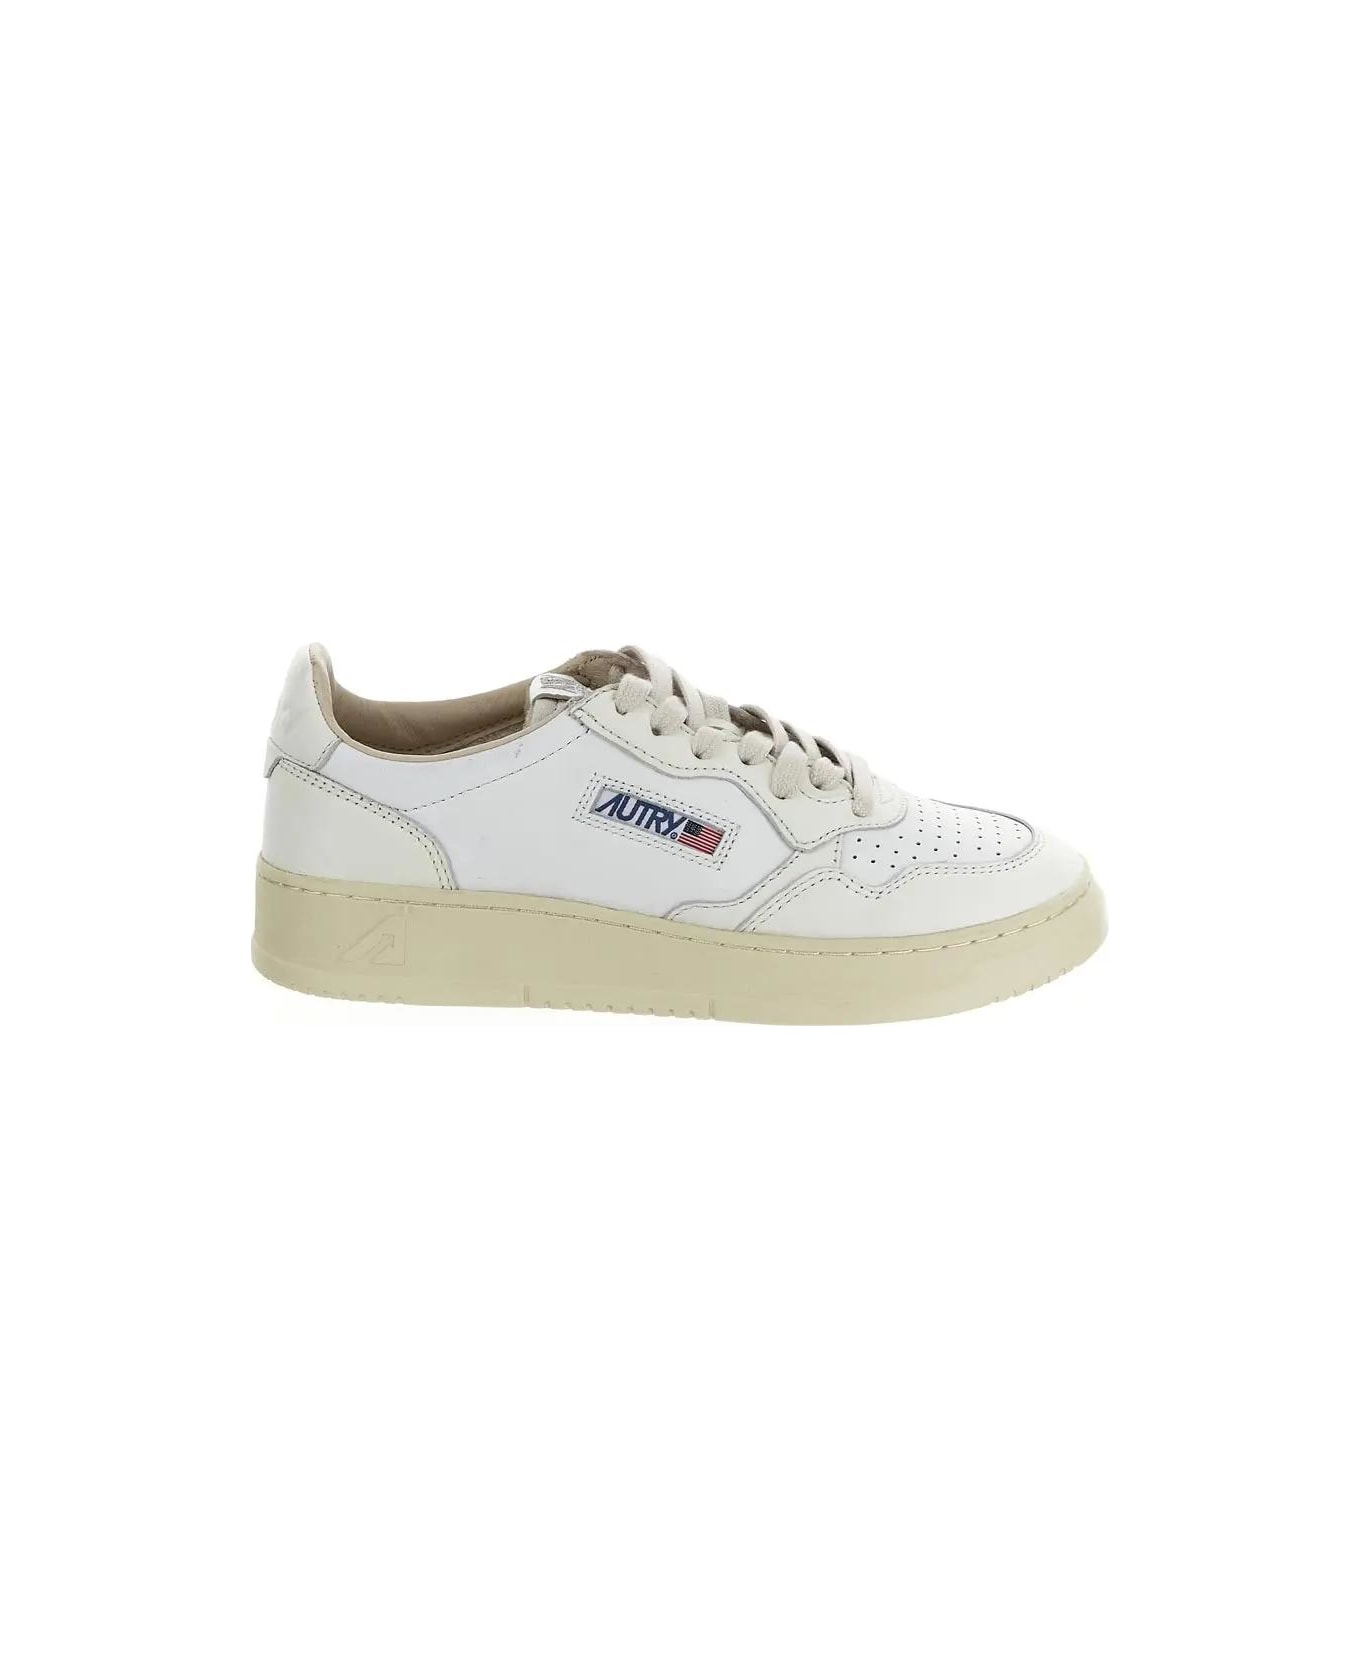 Autry Medalist Low Sneakers - WHT/WHT スニーカー